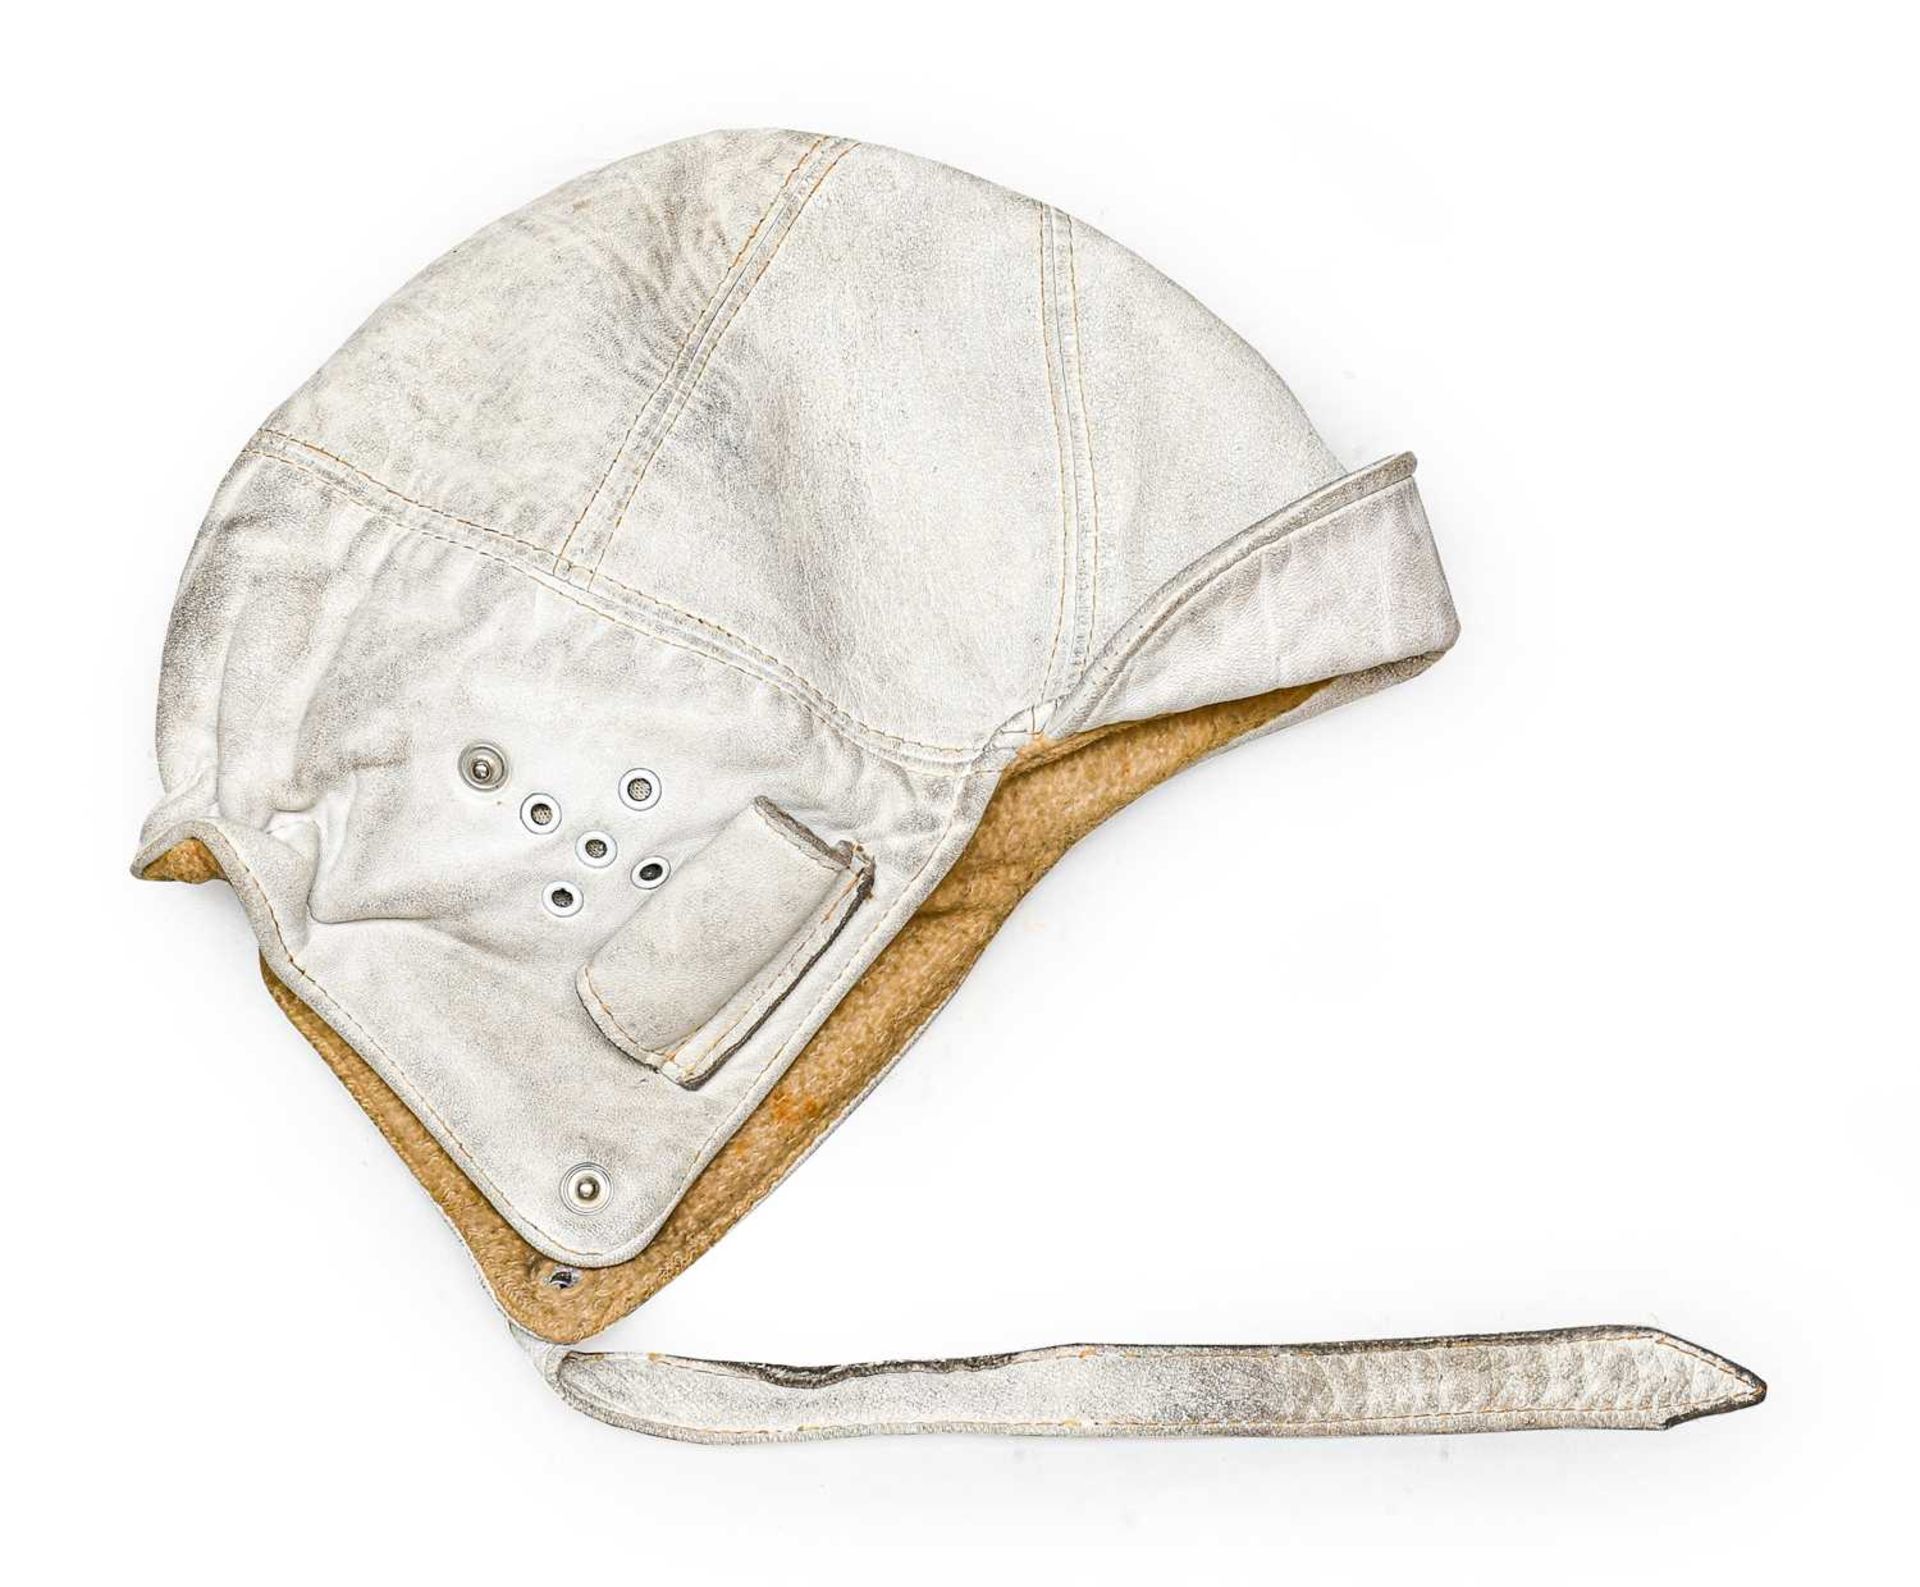 A Vintage White Leather Driver's Helmet, with double stitched seams, soft peak, rolled ear flaps and